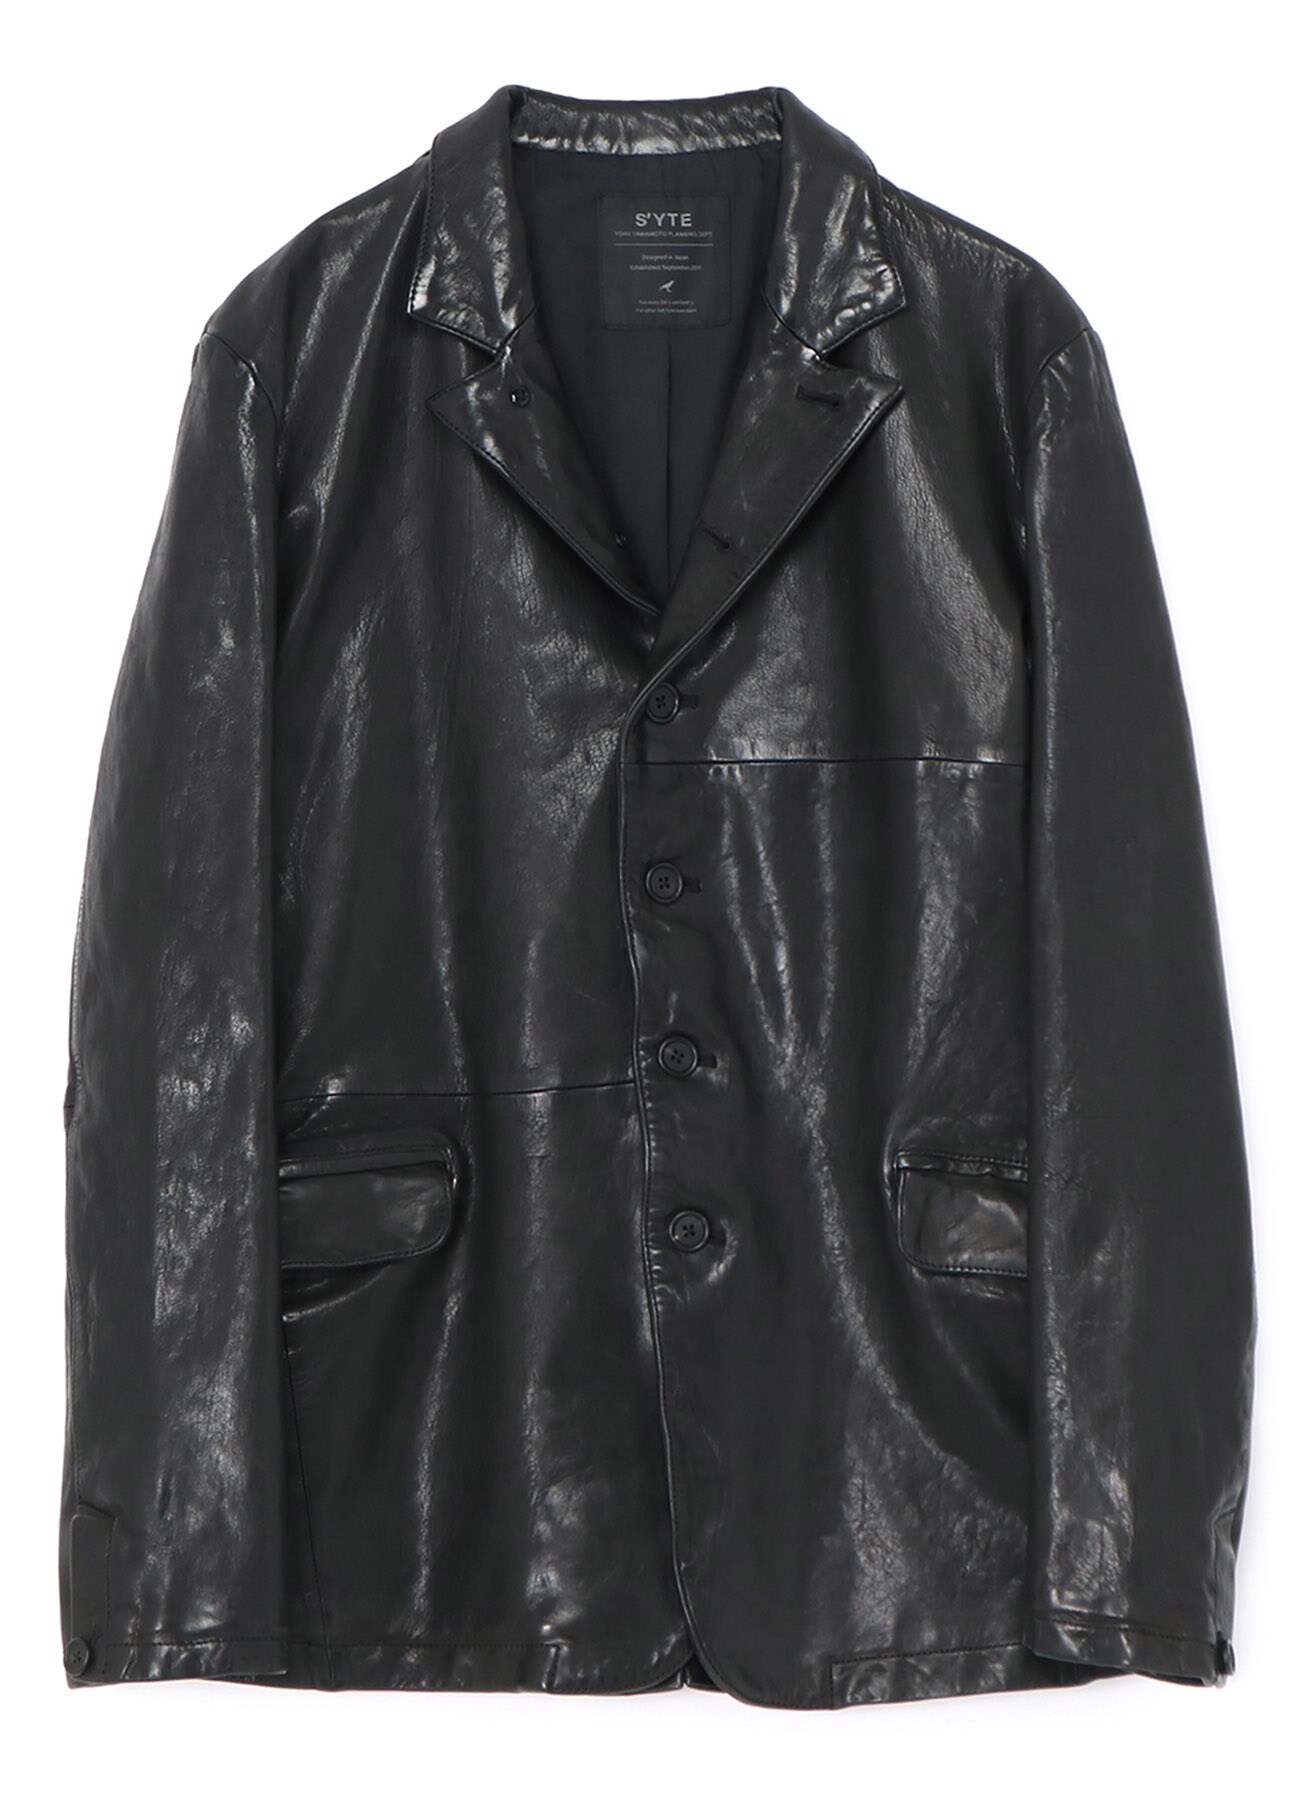 old sheep leather double tailored jacket